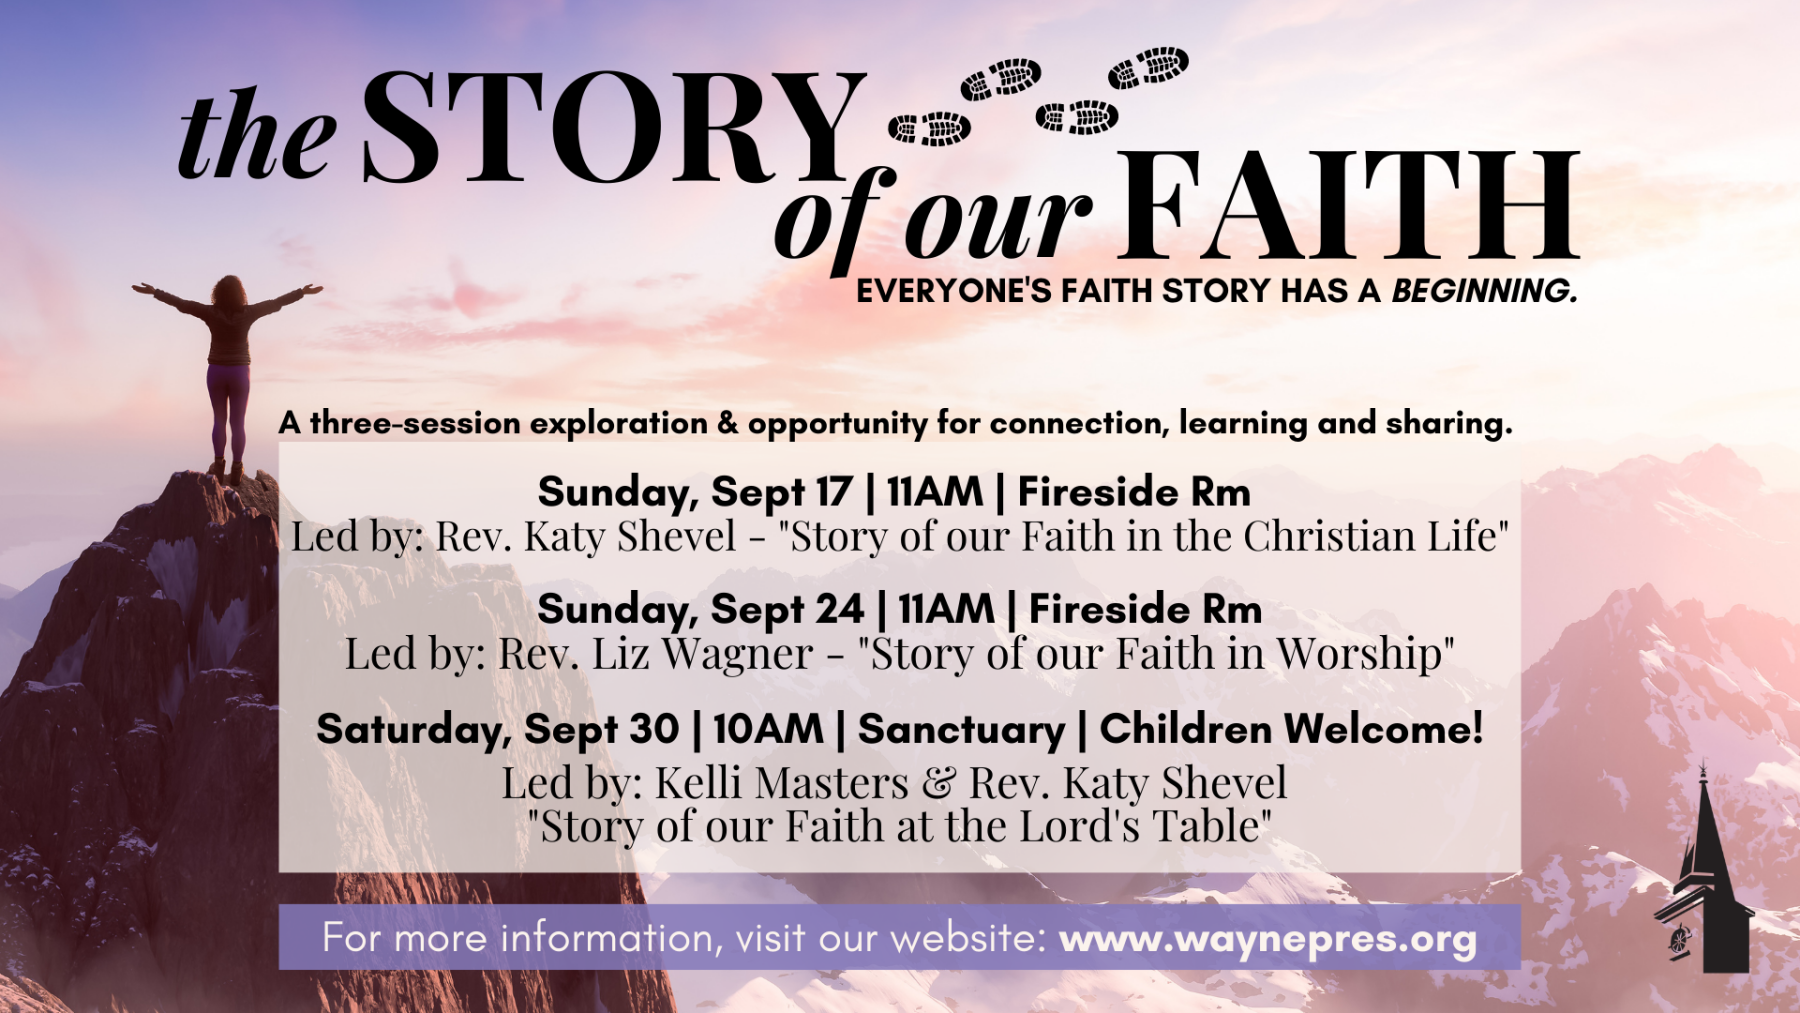 Story of our Faith #2 - In Worship with Rev. Liz